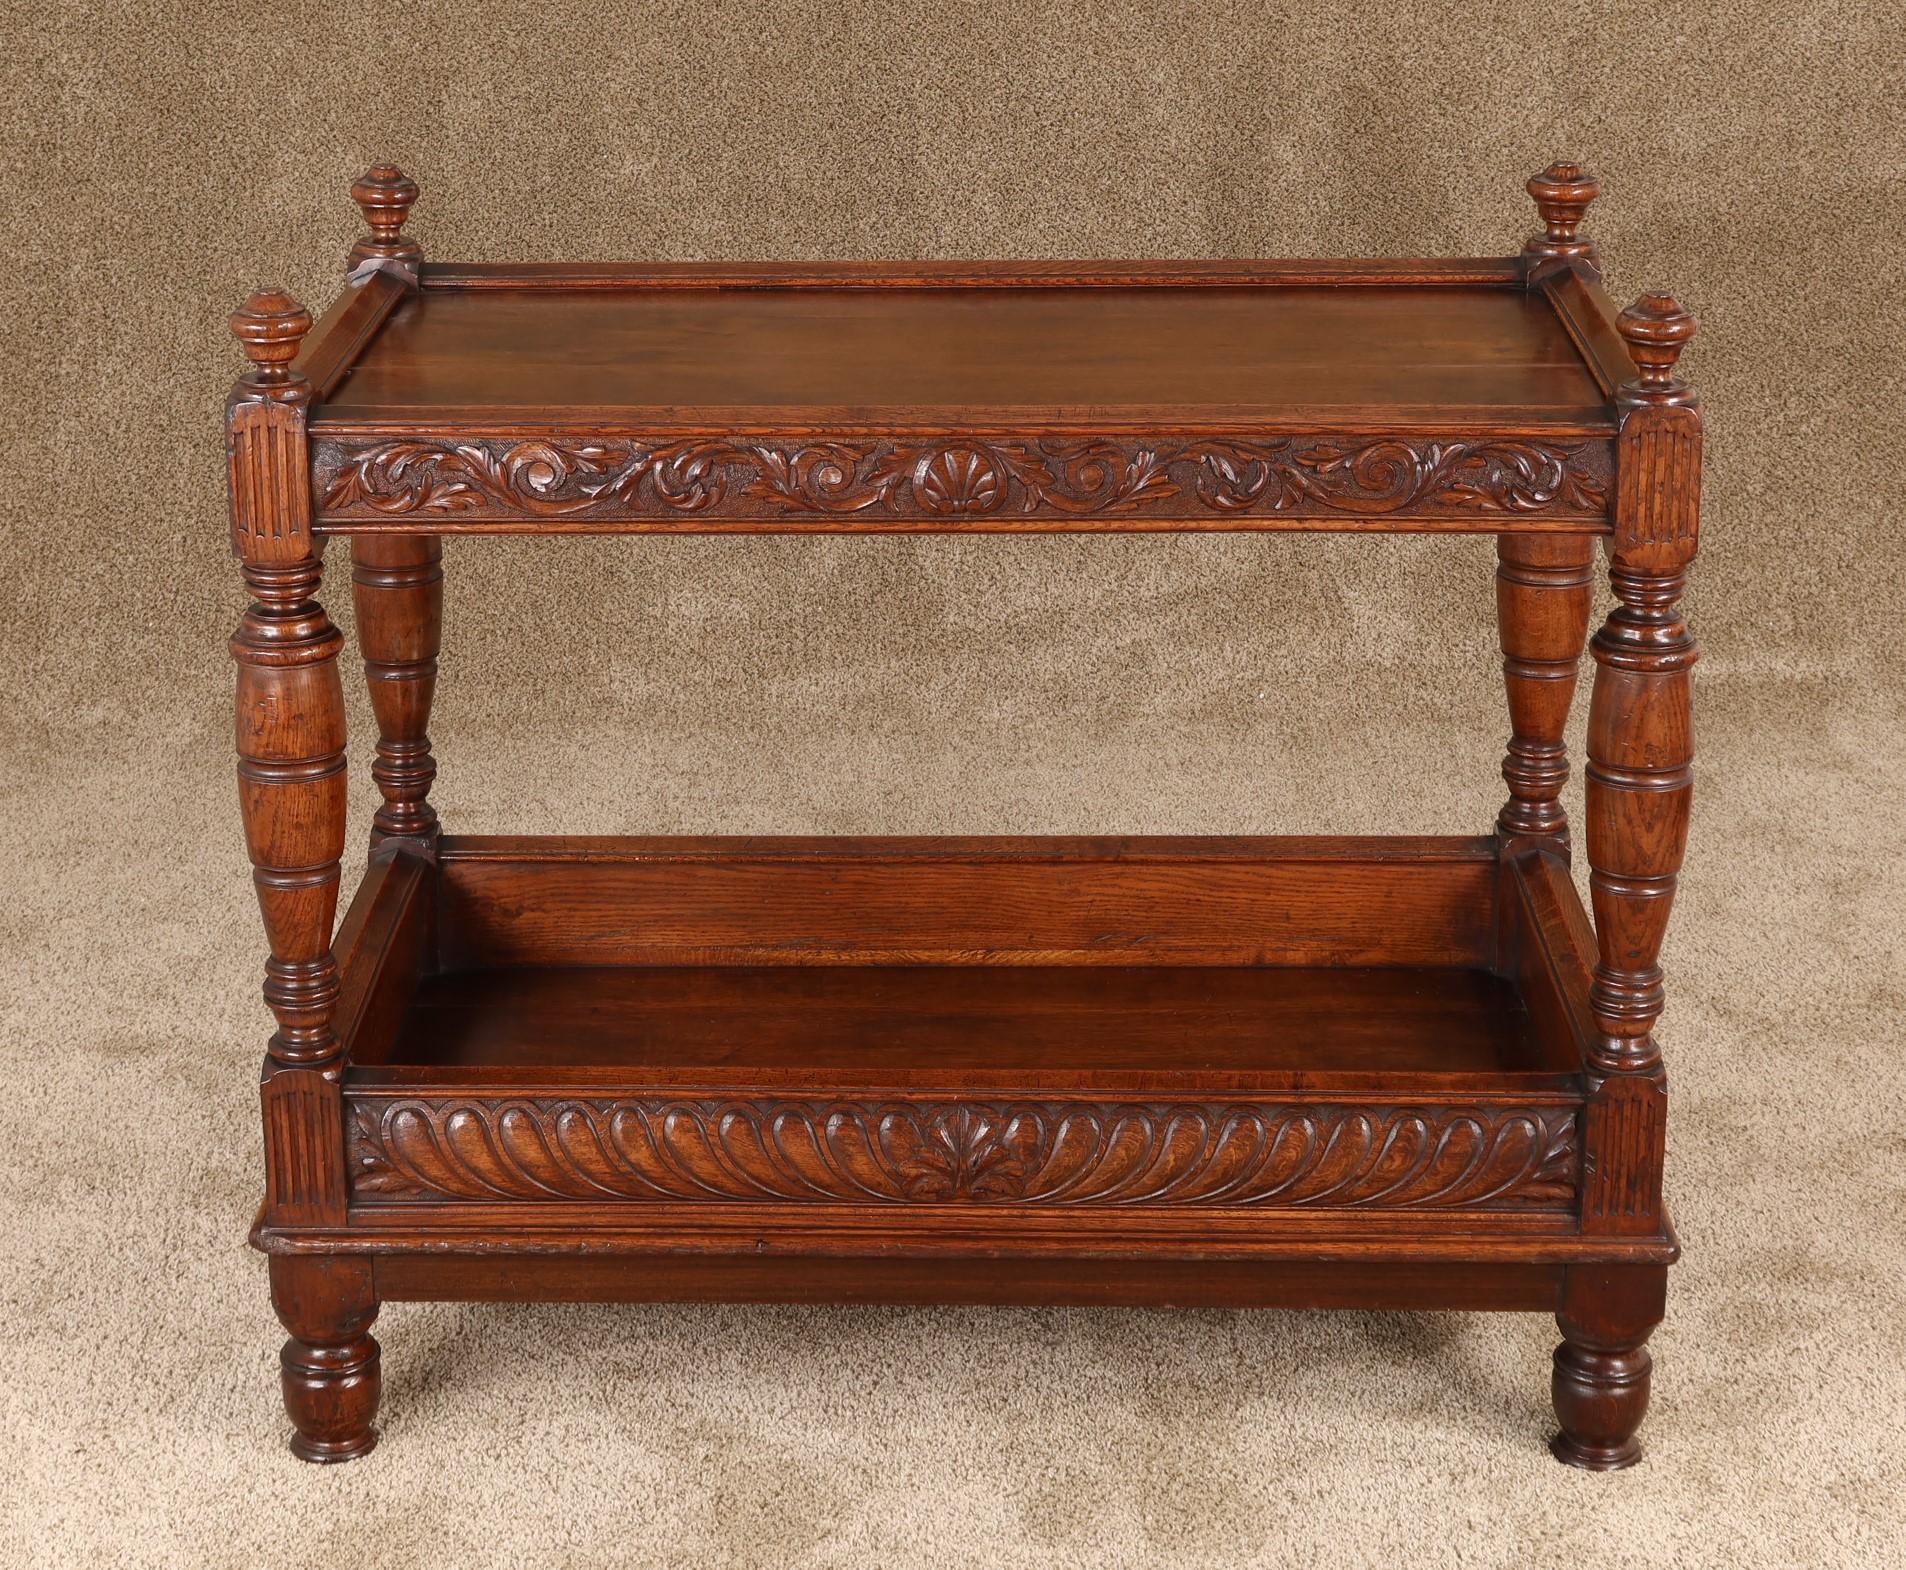 Hand-Crafted English Tudor Revival Oak Server with Exceptional Carvings, circa 1890 For Sale